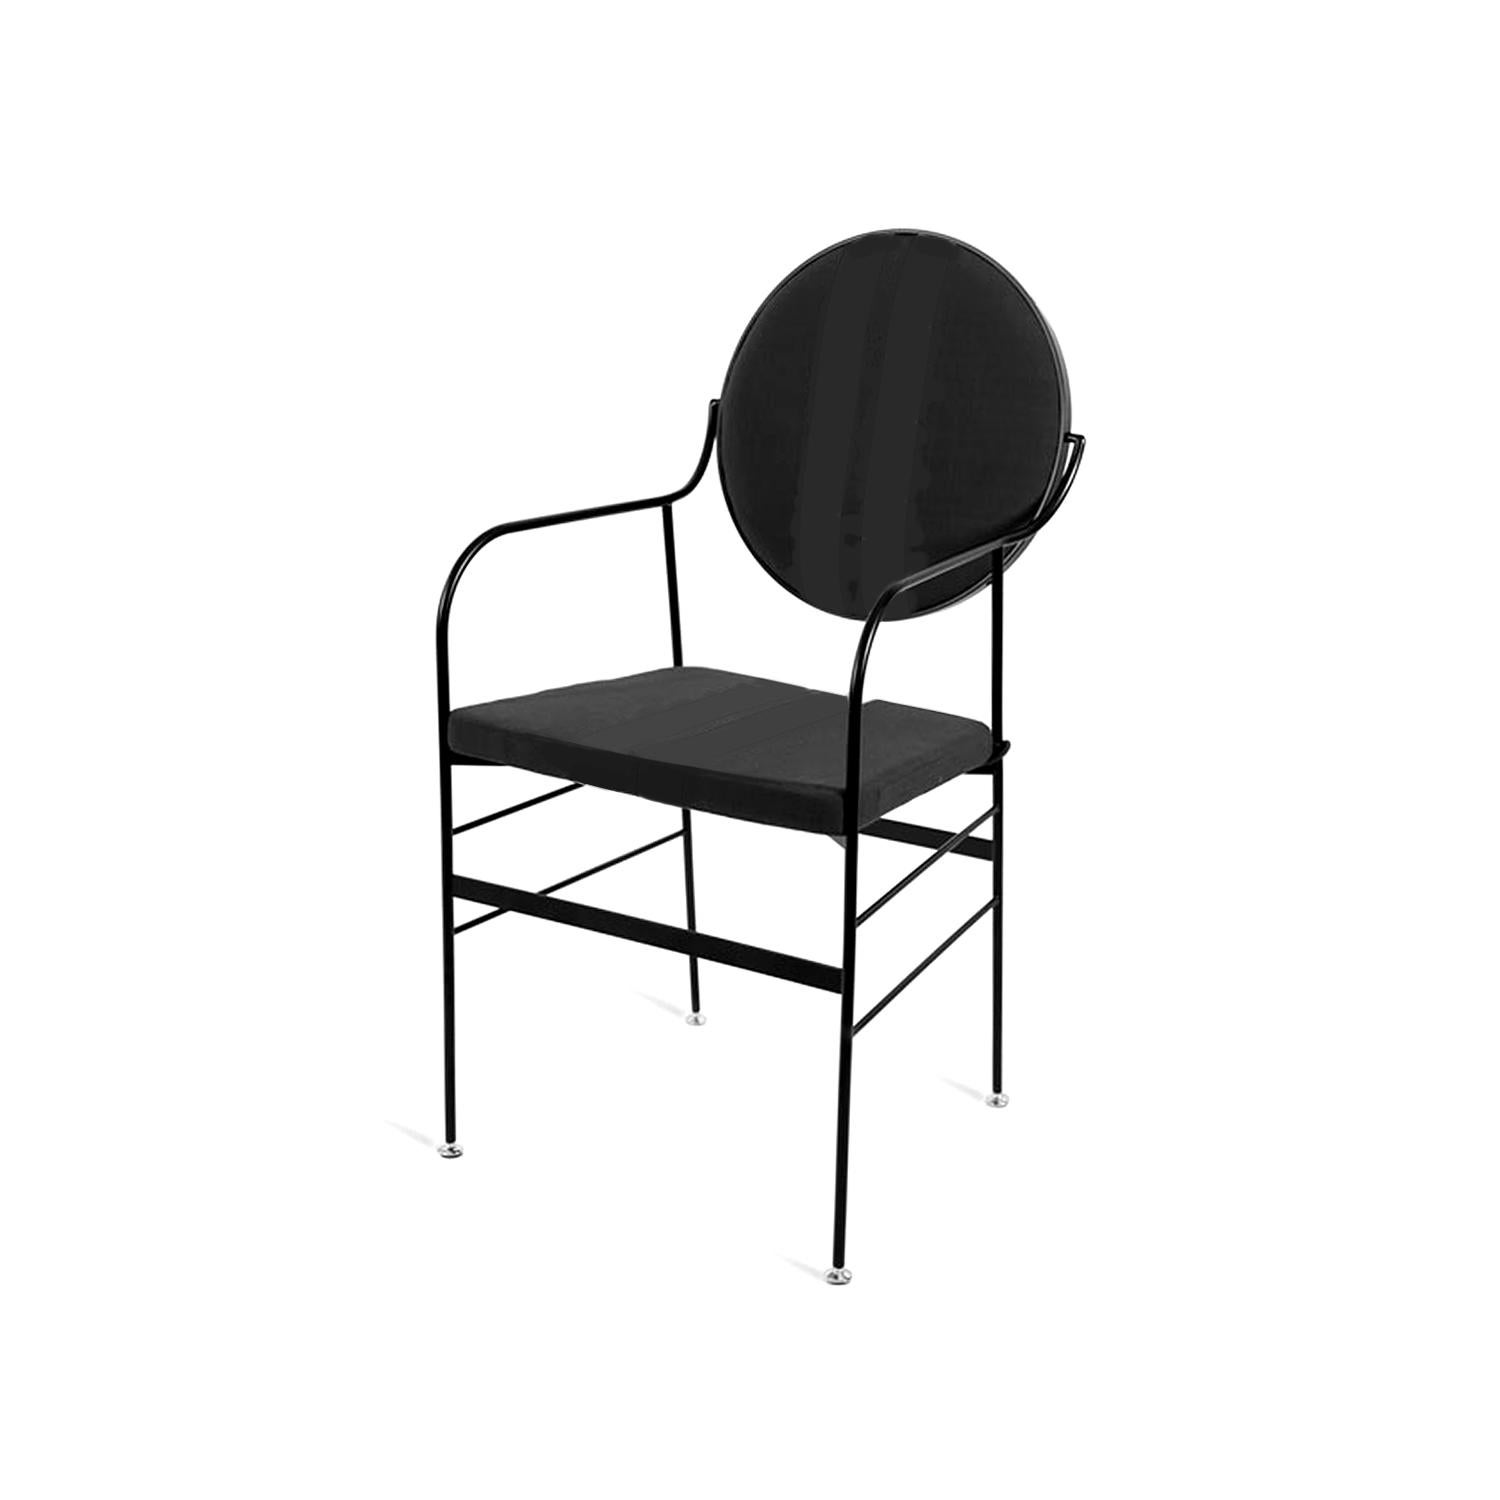 Italian In Stock in Los Angeles, Velvet Dining Chair Black, by Paolo Calcagni